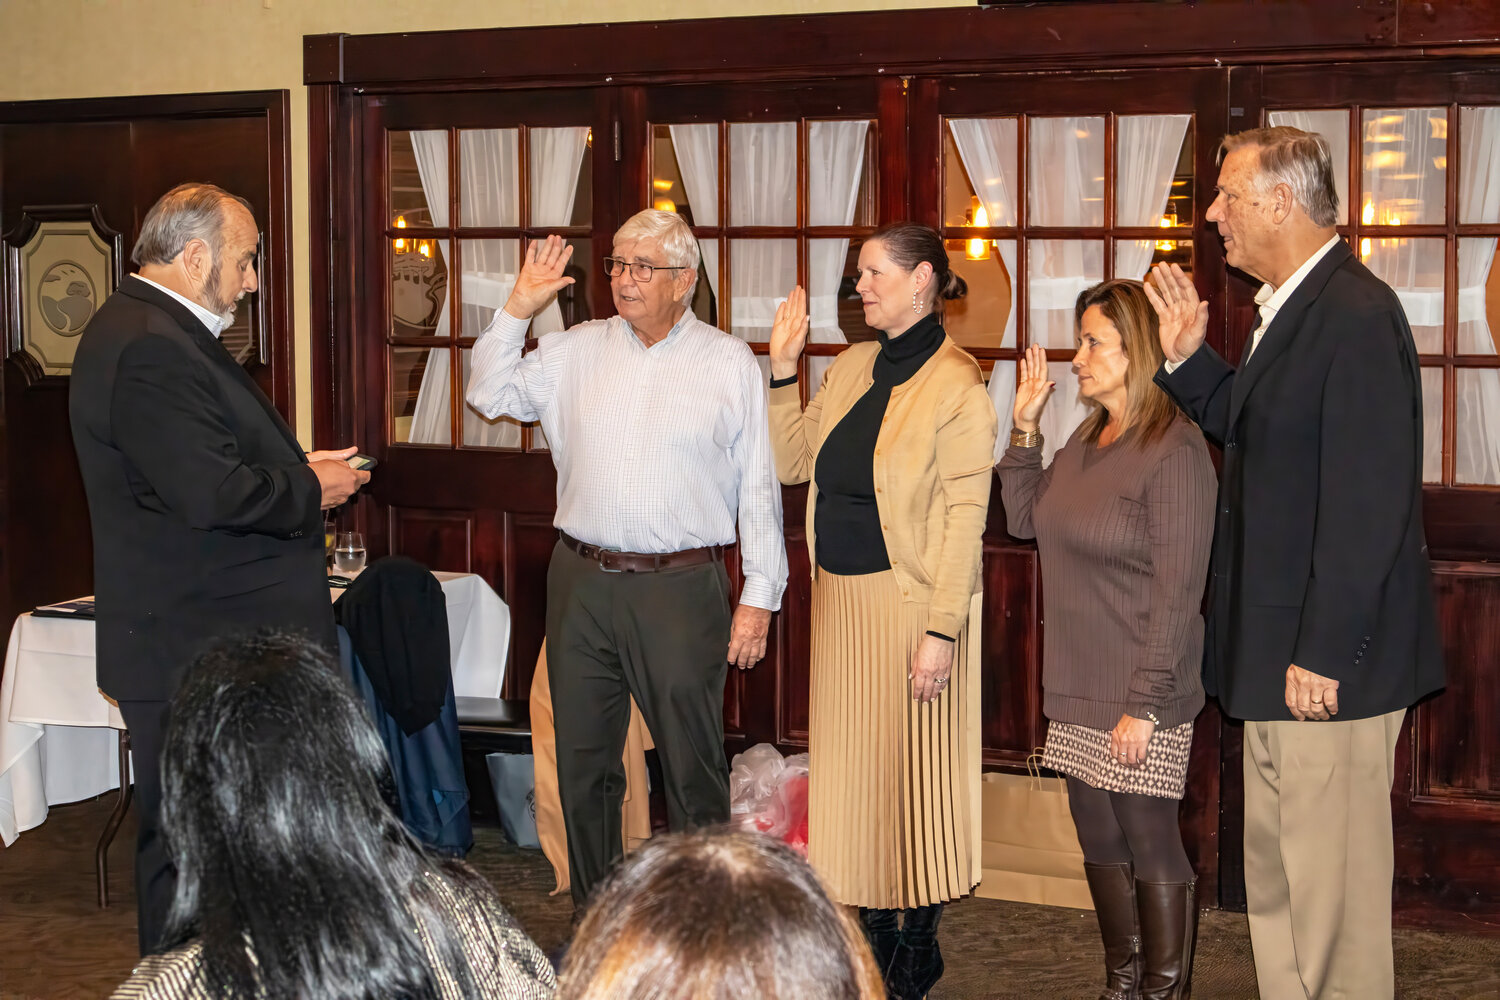 Rockville Centre Mayor Francis Murray, left, swearing in Chamber of Commerce President Ed Asip (Lions Club), Vice President Donna O’Reilly Eineman (Douglas Elliman Real Estate), Secretary Carol O’Leary (Coach Realtors) and Treasurer Tom Bogue (Flushing Bank) at the chamber’s annual installation dinner on Jan. 25.